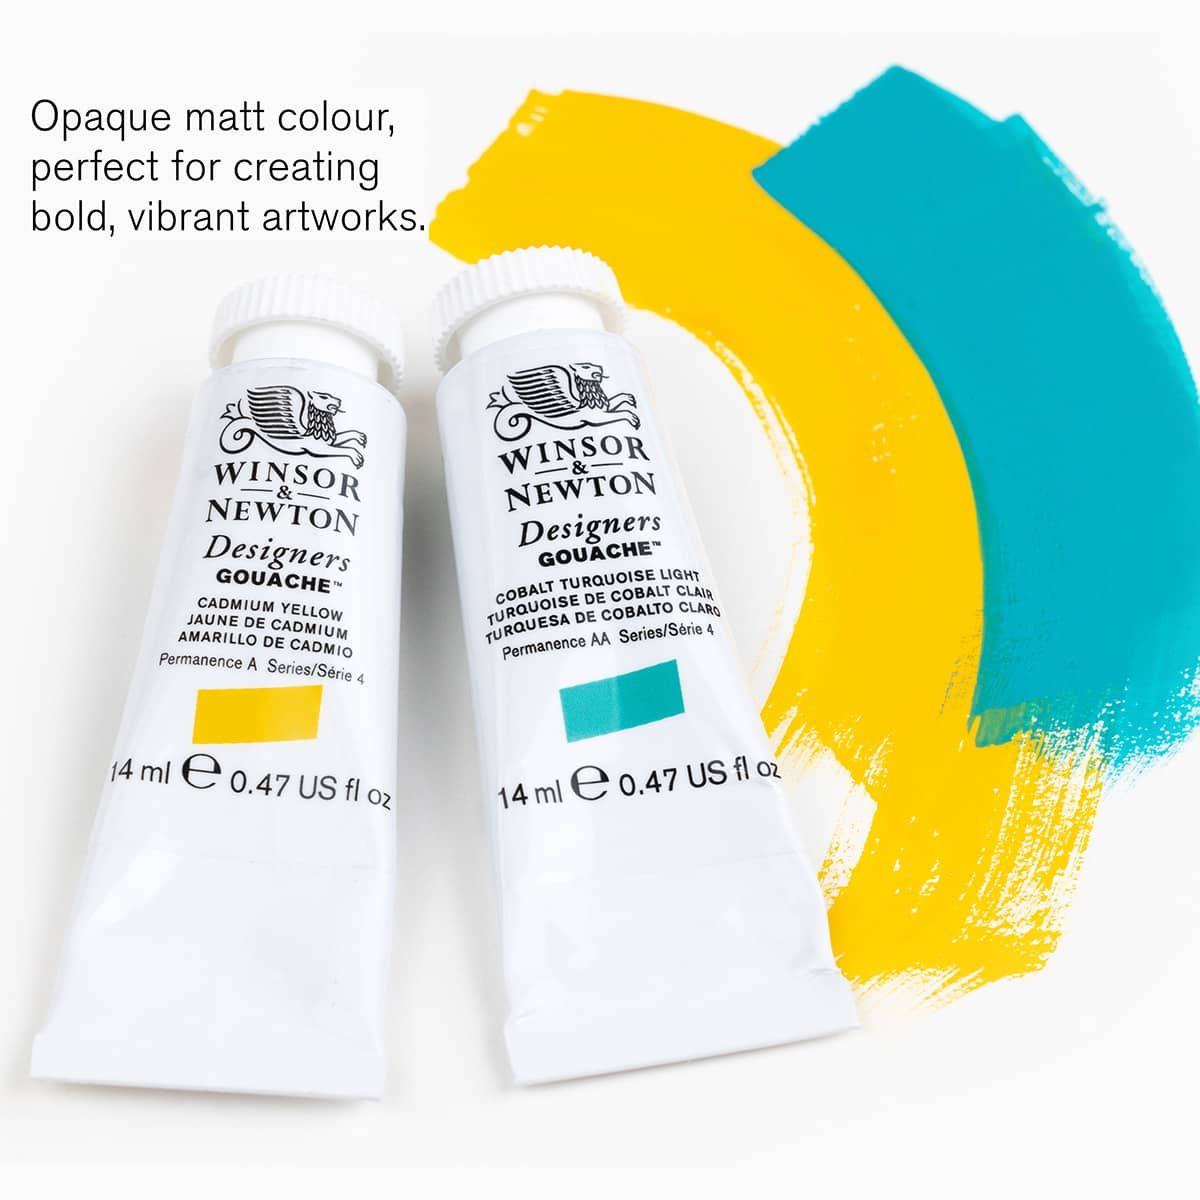 89 Brilliant, smooth and extremely opaque water-based colors